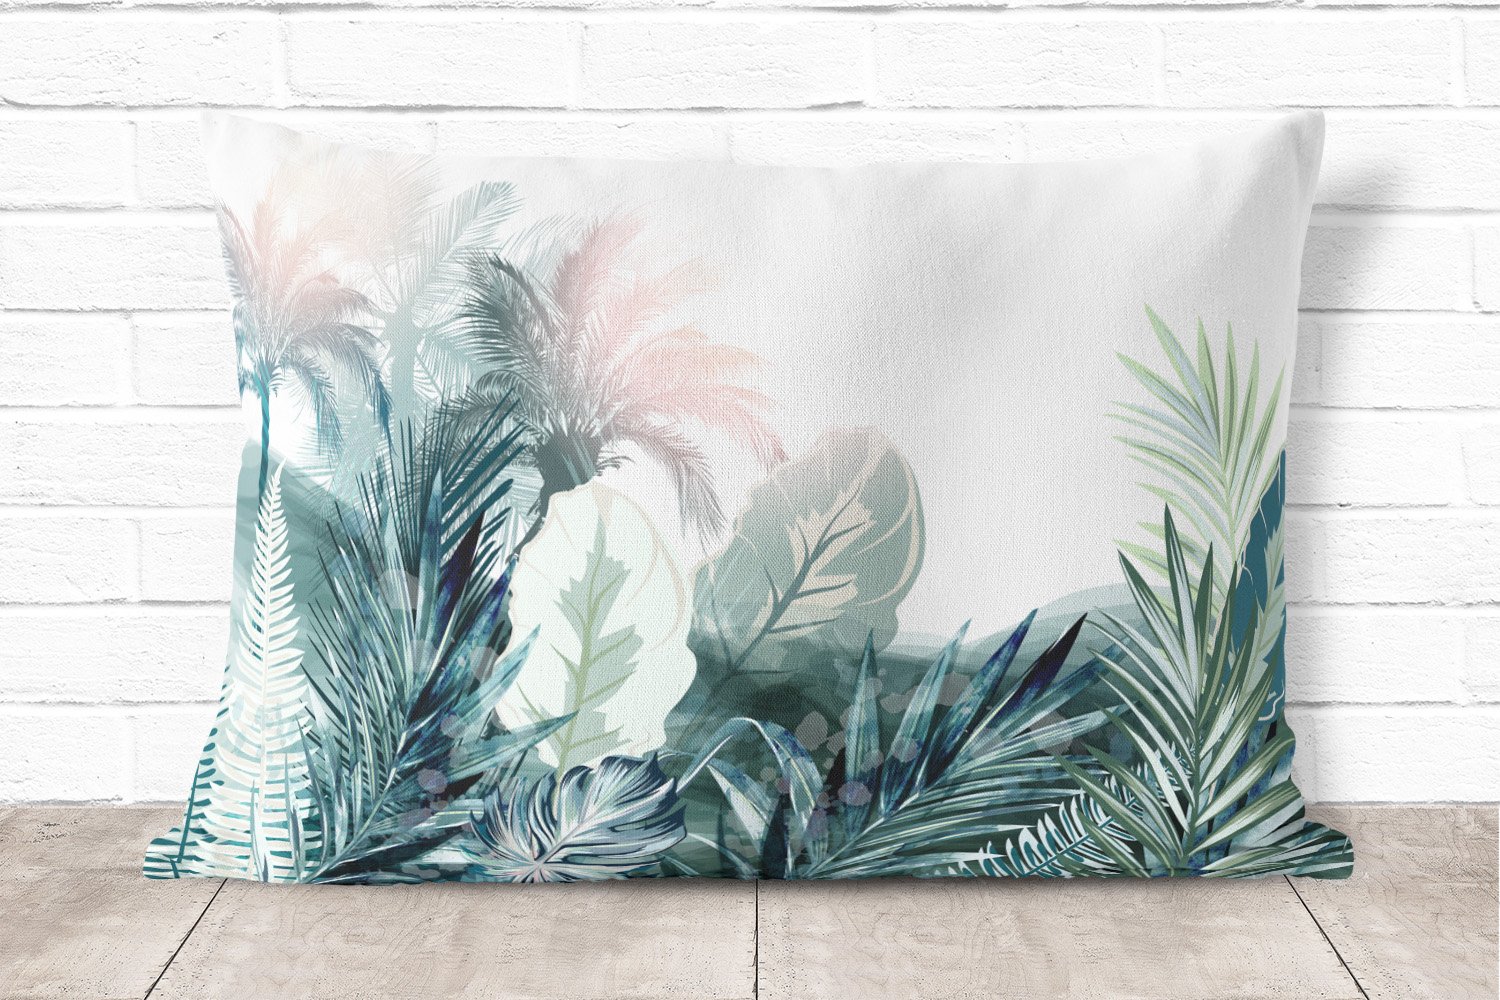 Big pillow with a palm.